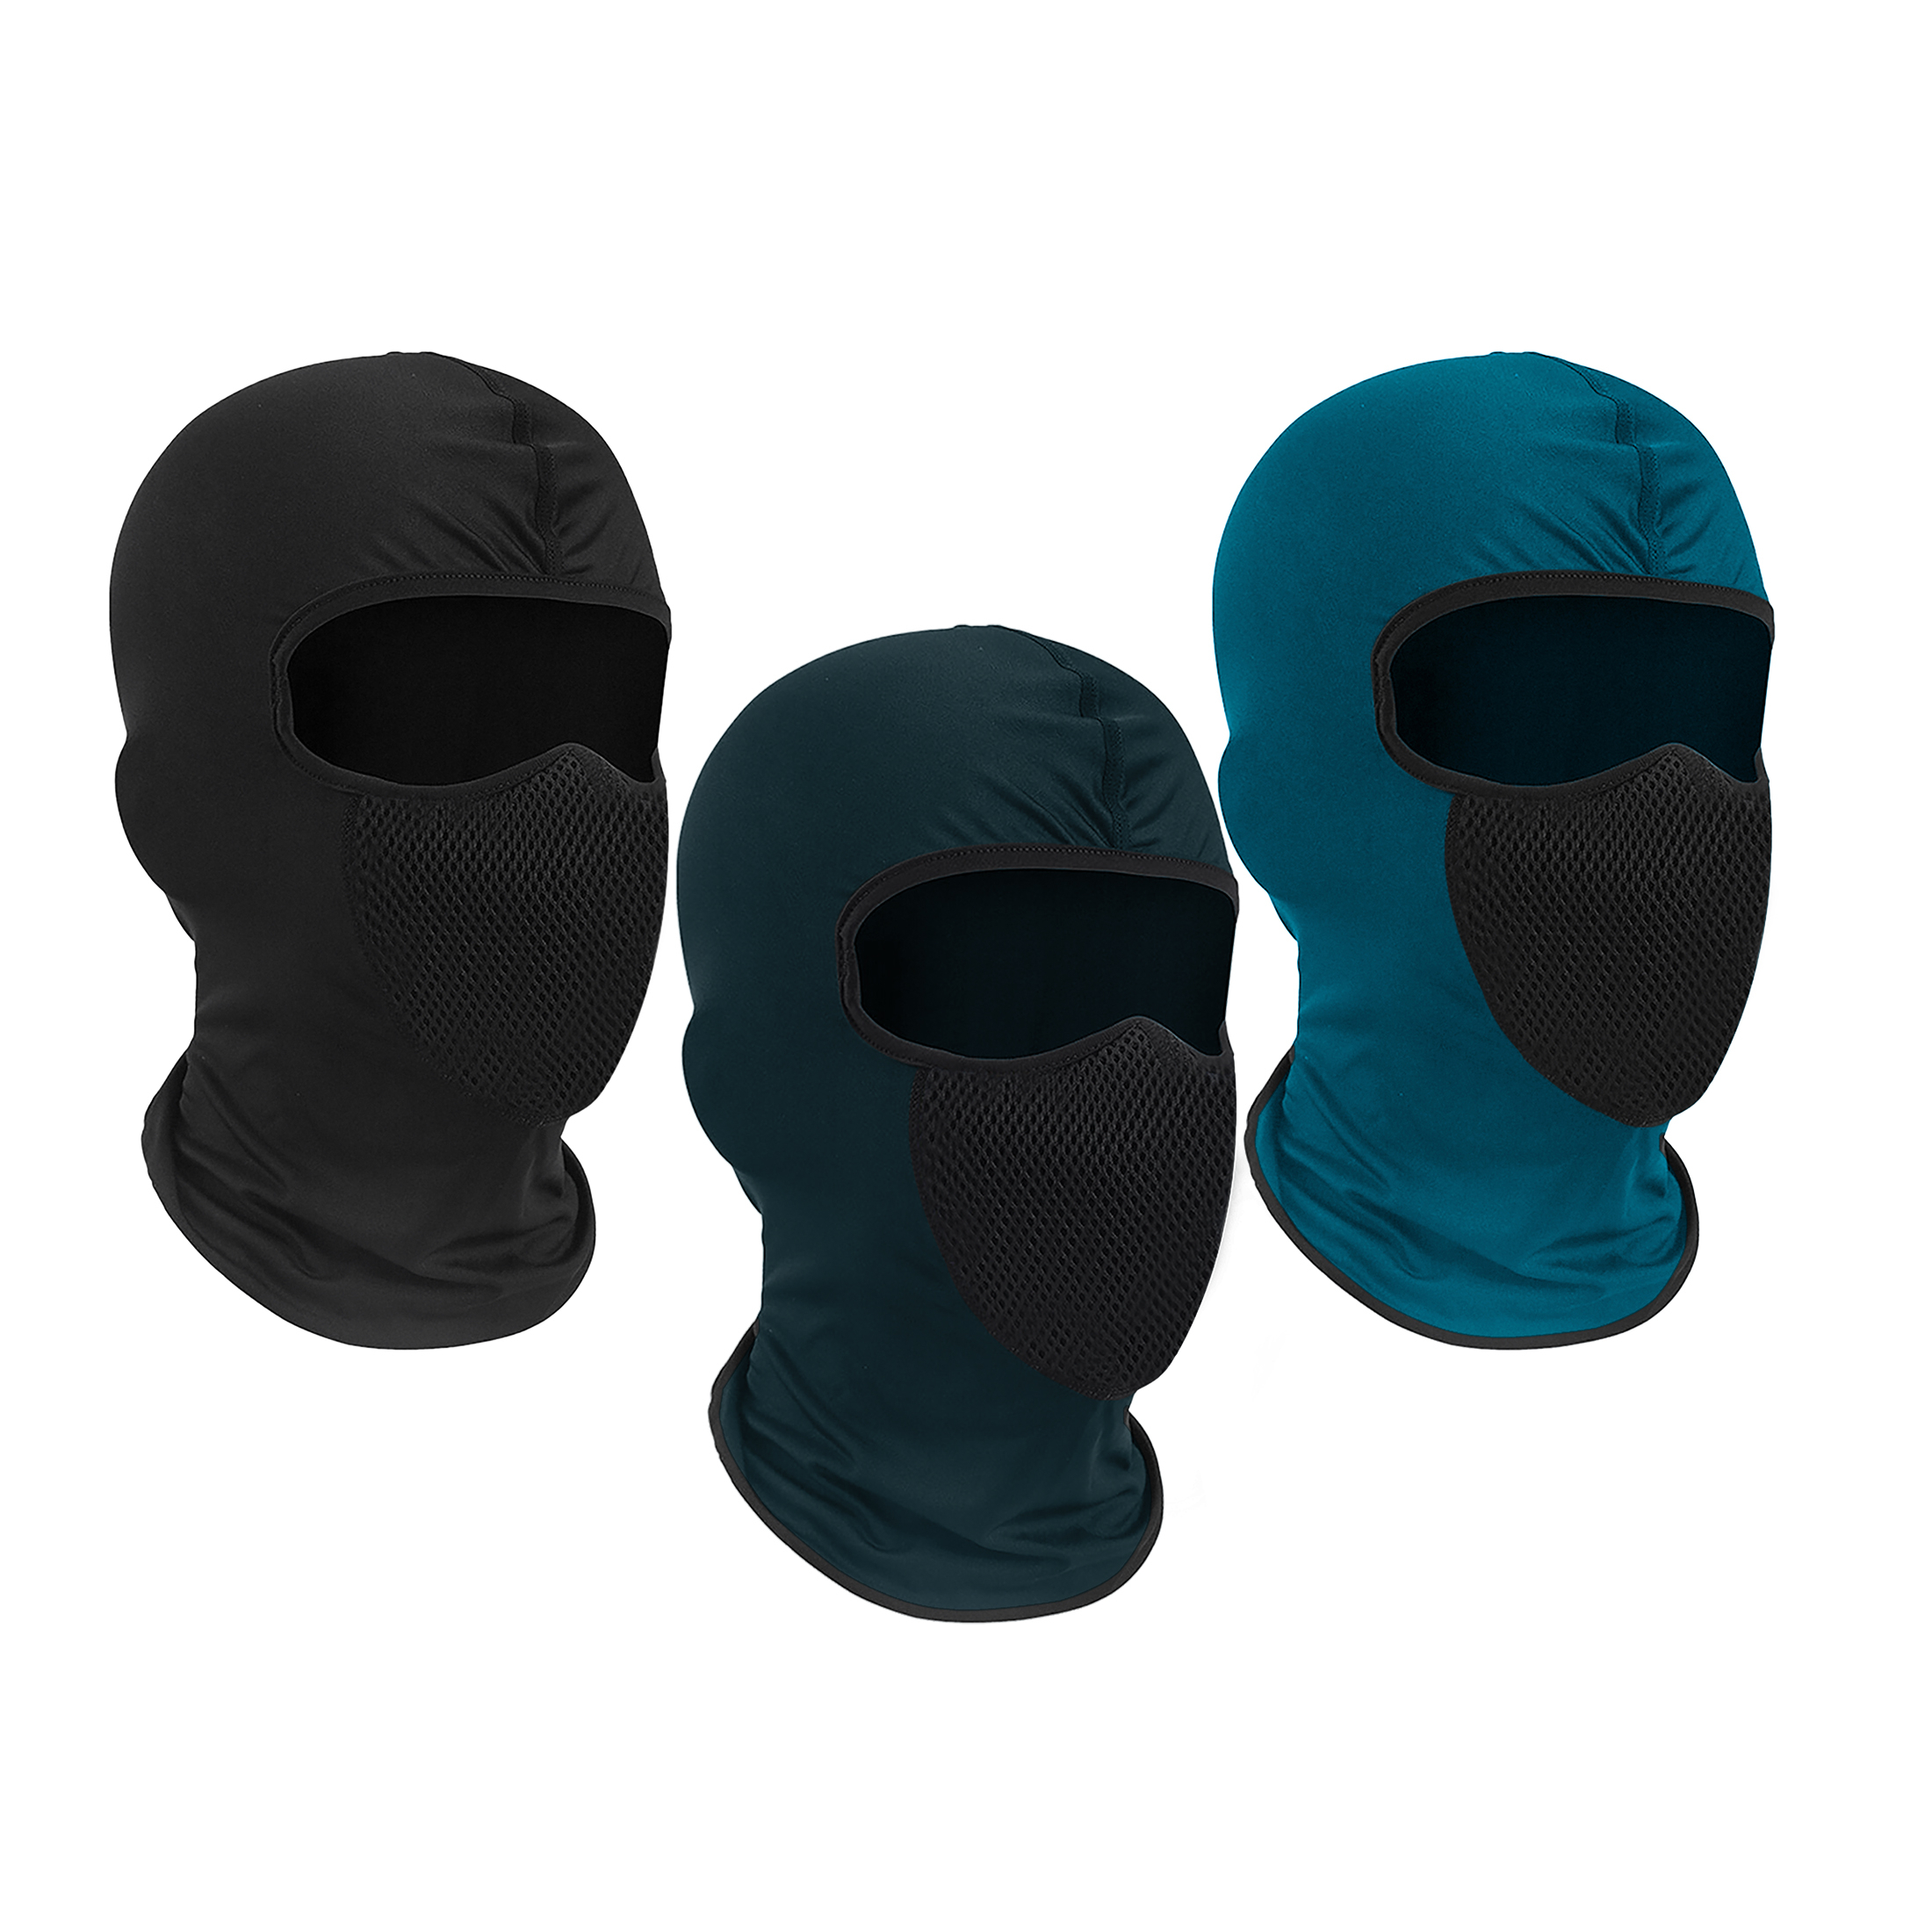 2-Pack: Men's Warm Winter Windproof Breathable Cozy Thermal Balaclava Winter Ski Full Face Mask - Black & Navy